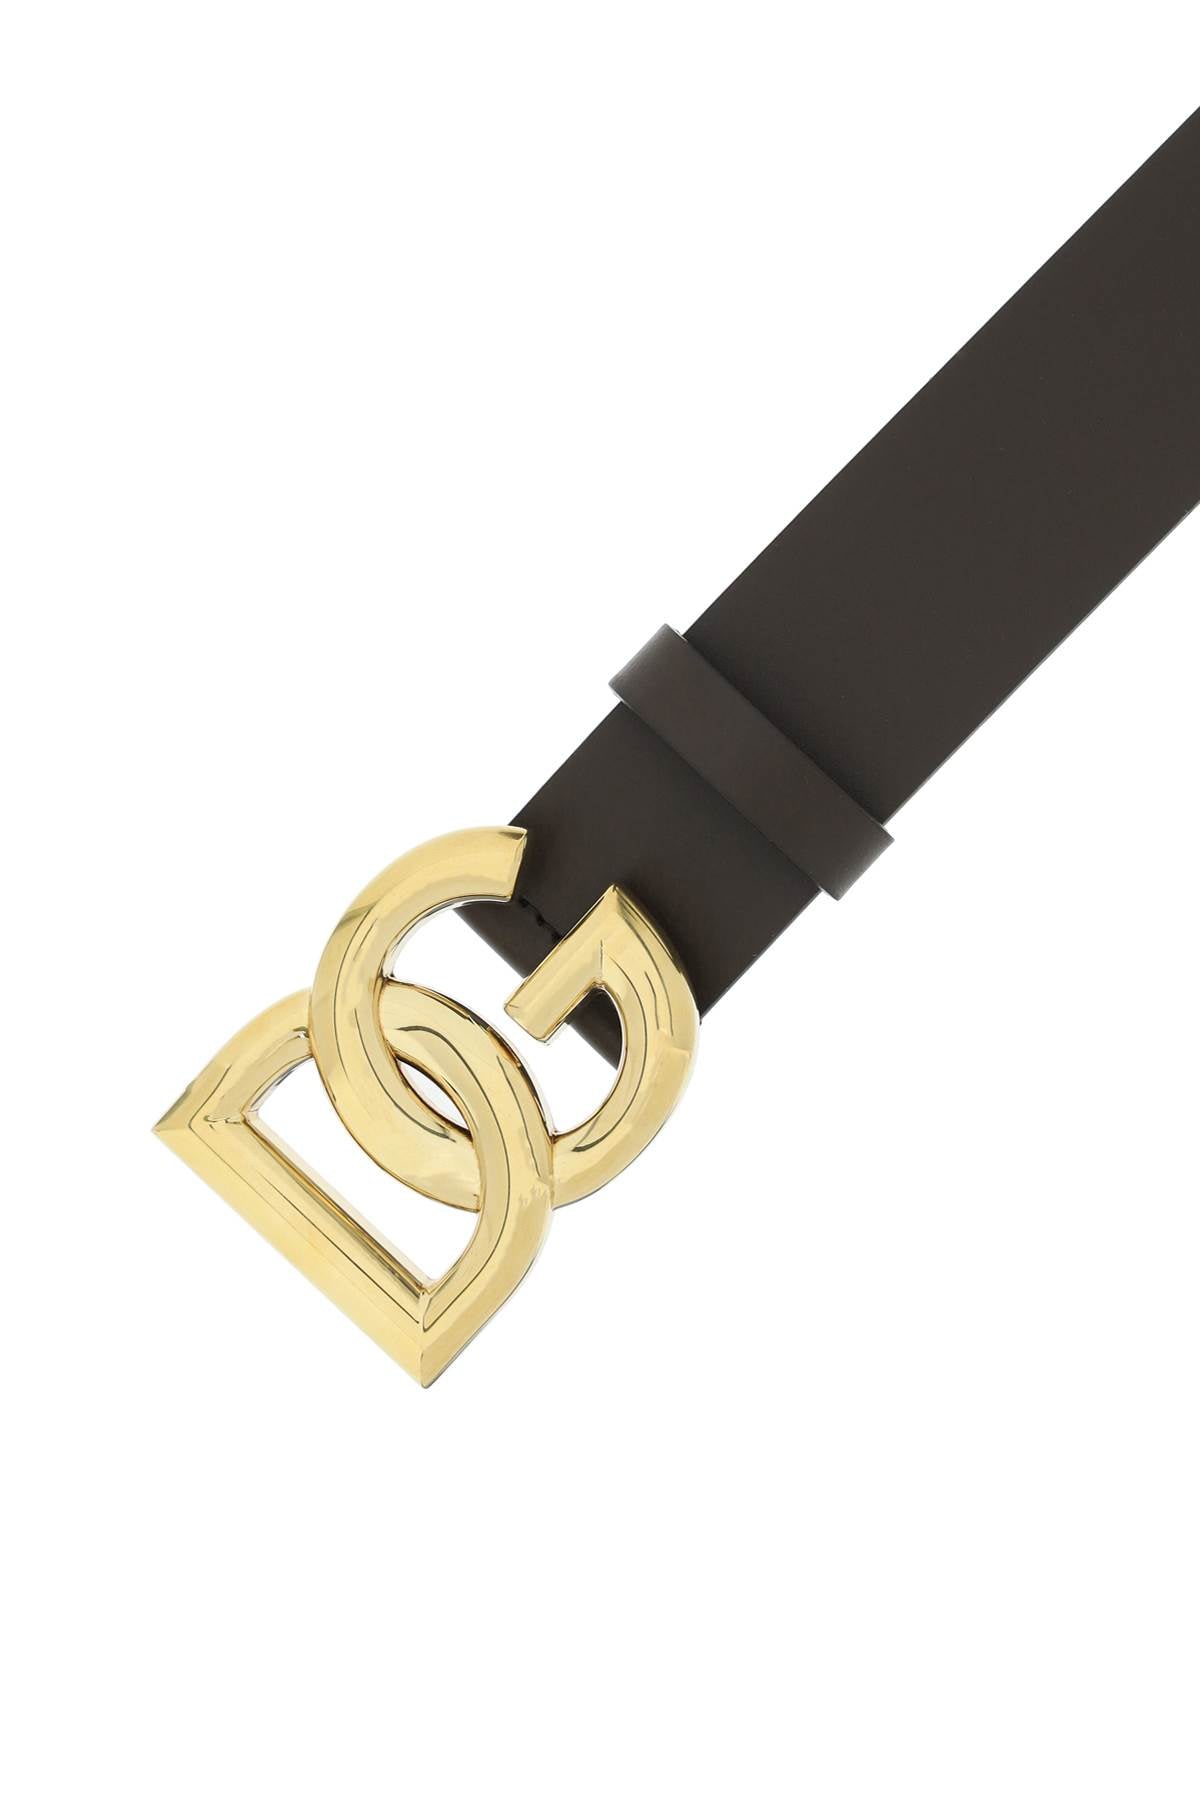 Dolce & Gabbana Lux Leather Belt With Dg Buckle   Nero